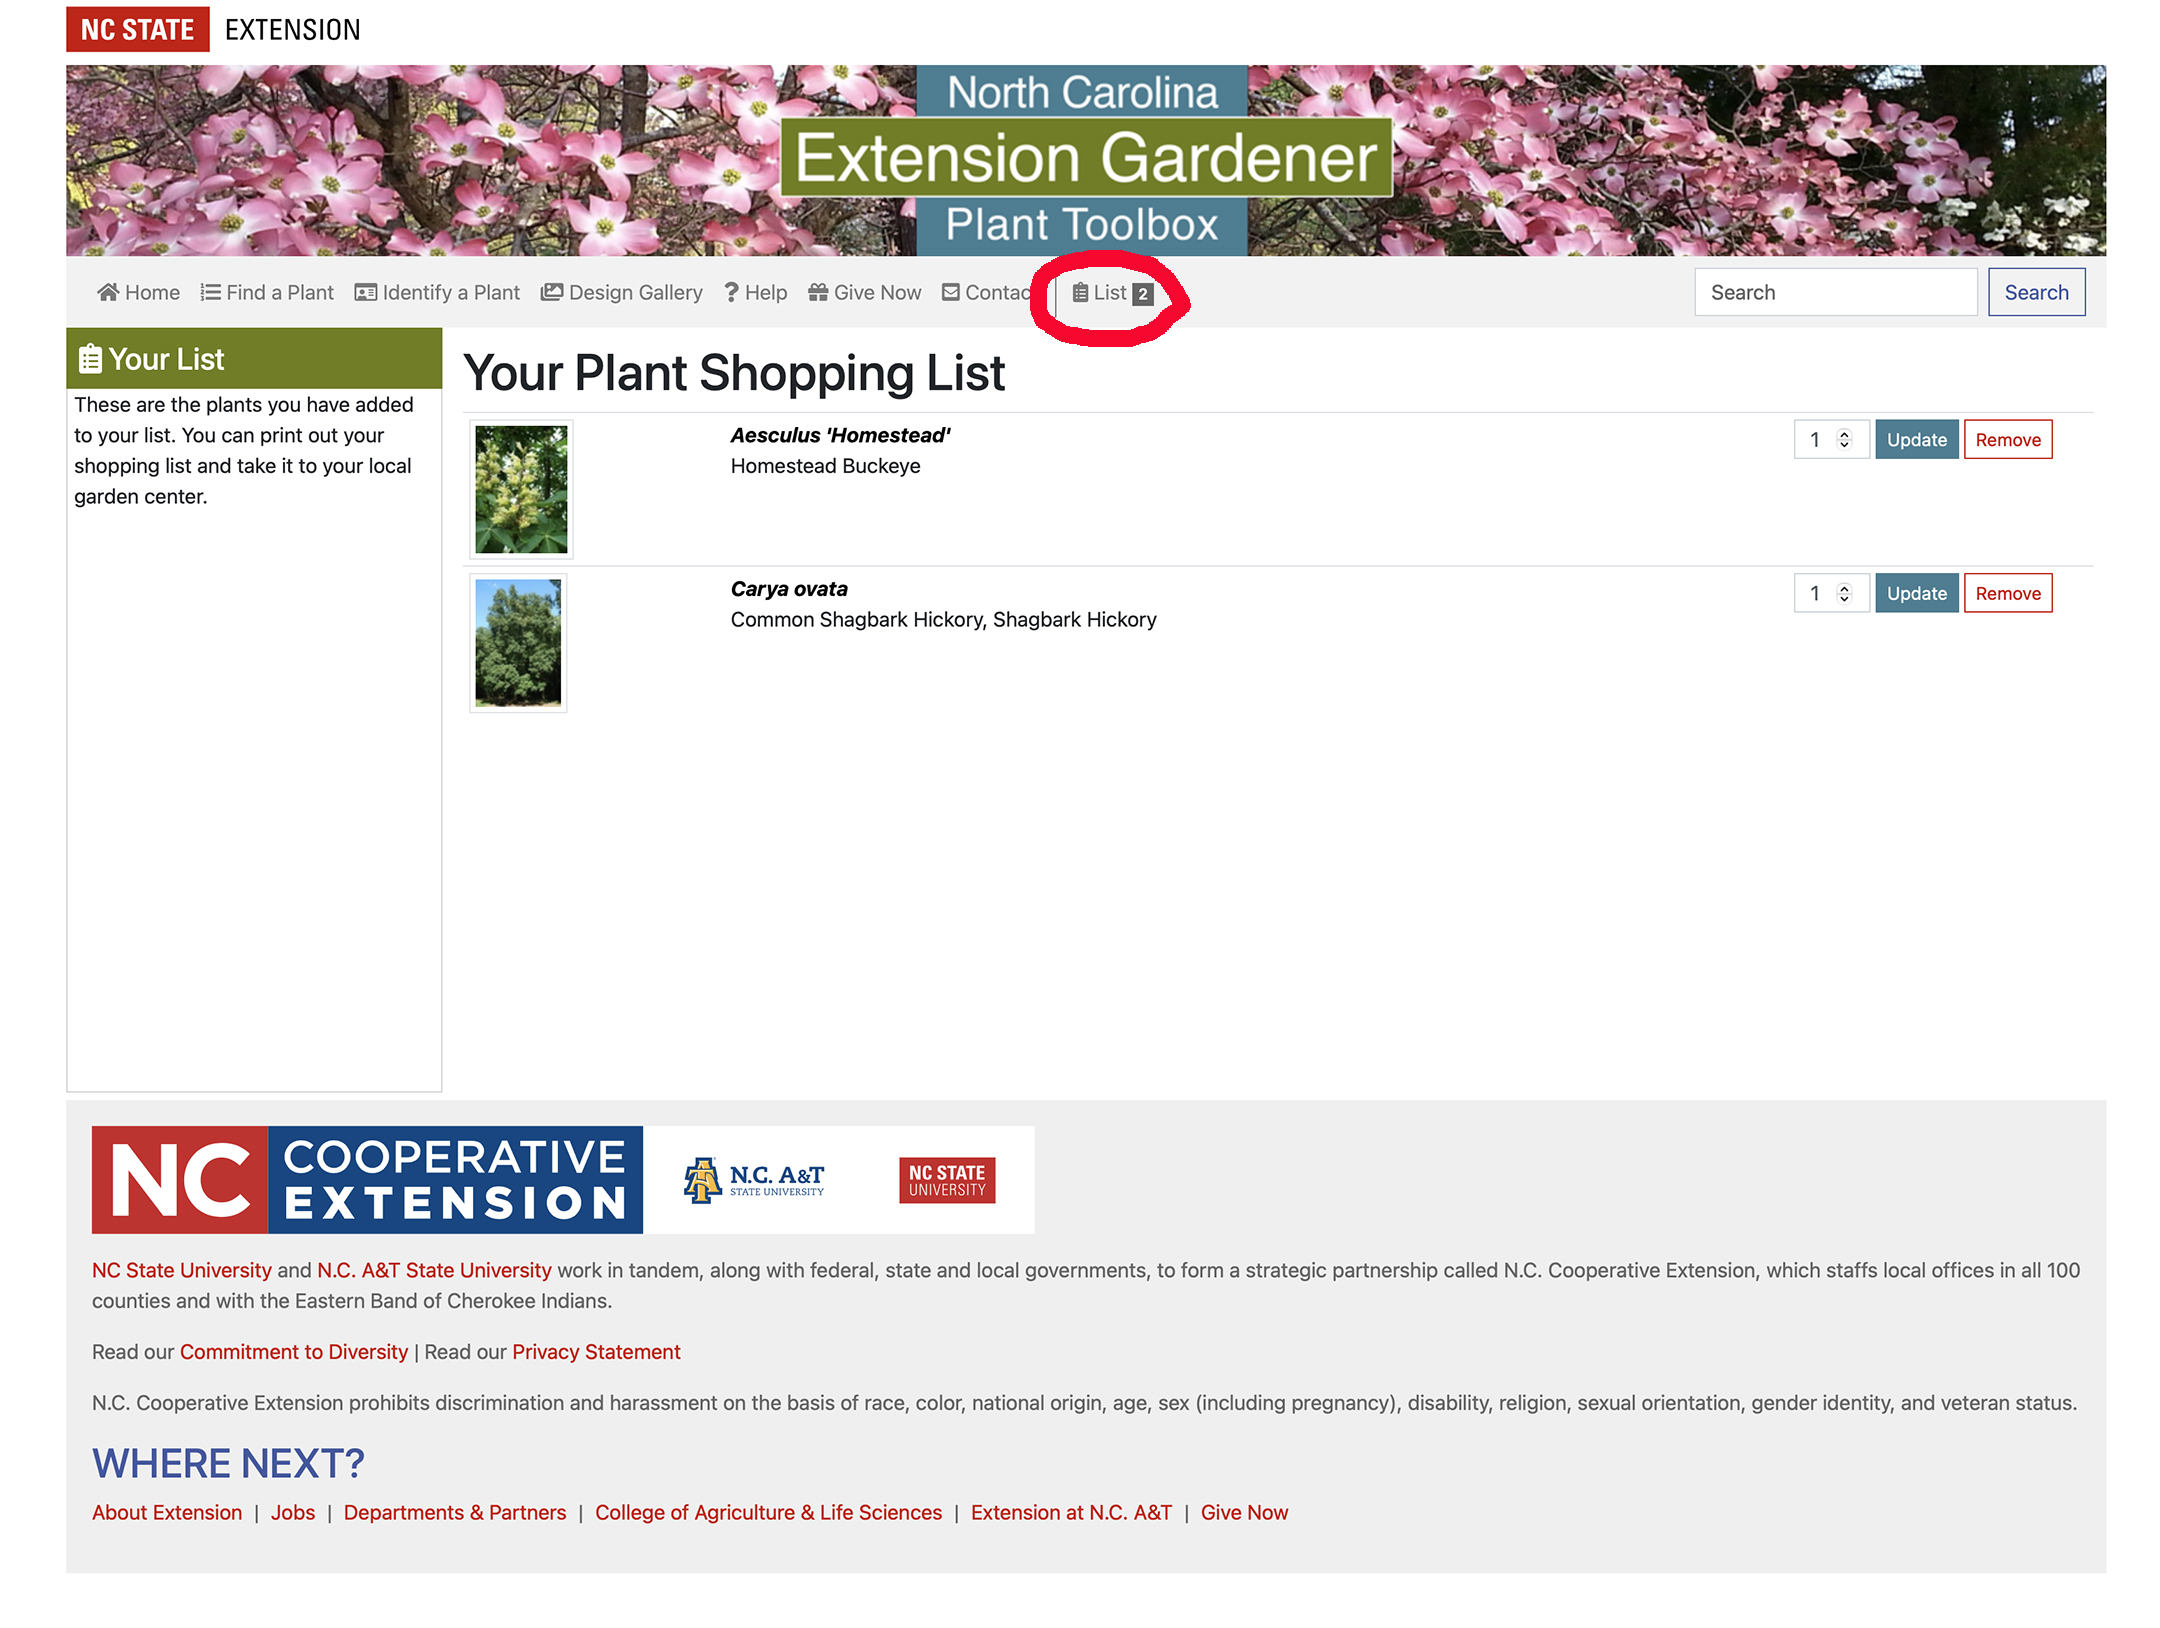 Page view of shopping list showing two items. List button circled in red.